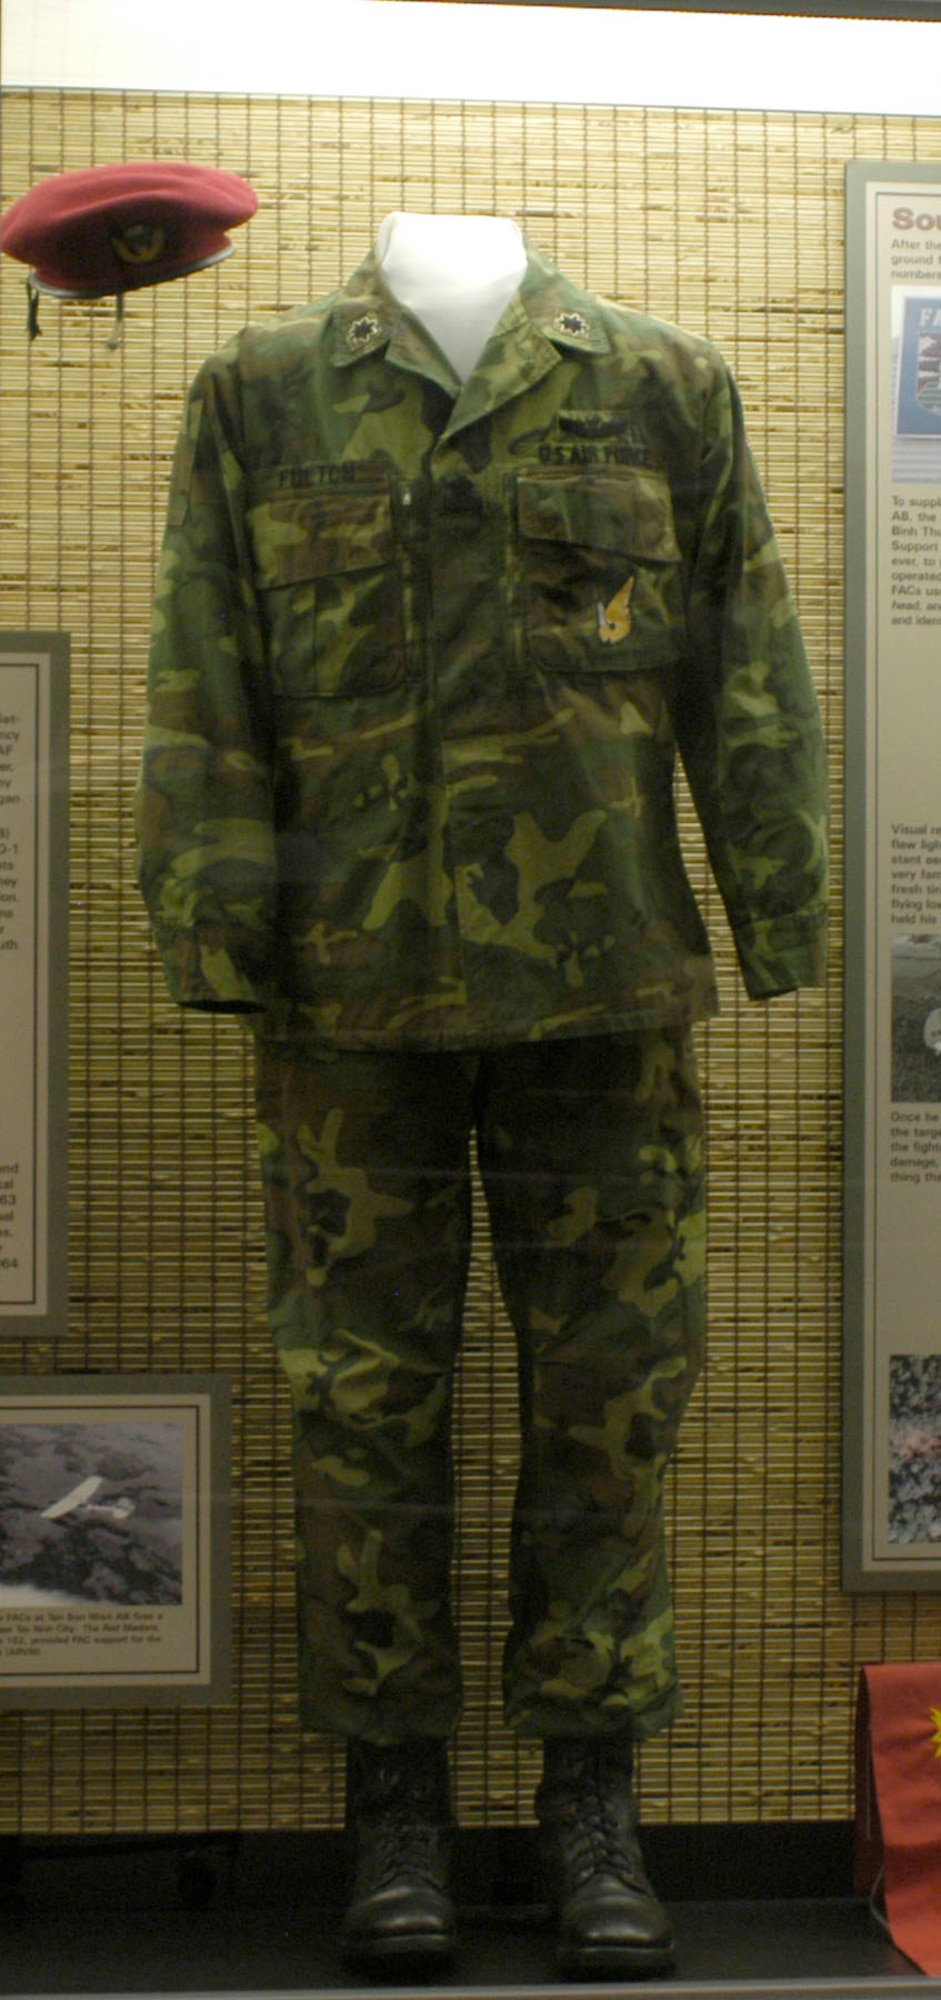 DAYTON, Ohio - Uniform worn by Col. William J. Fulton in the late 1960s. He was a USAF FAC from the 19th TASS assigned to the elite South Vietnamese Airborne Brigade headquartered at Tan Son Nhut AB. To avoid standing out and becoming a target for snipers, these FACs–call sign Red Marker–wore the Vietnamese uniform, but with USAF insignia. This item is on display in the A Dangerous Business: Forward Air Control in Southeast Asia exhibit in the Southeast Asia War Gallery at the National Museum of the U.S. Air Force. (U.S. Air Force photo)